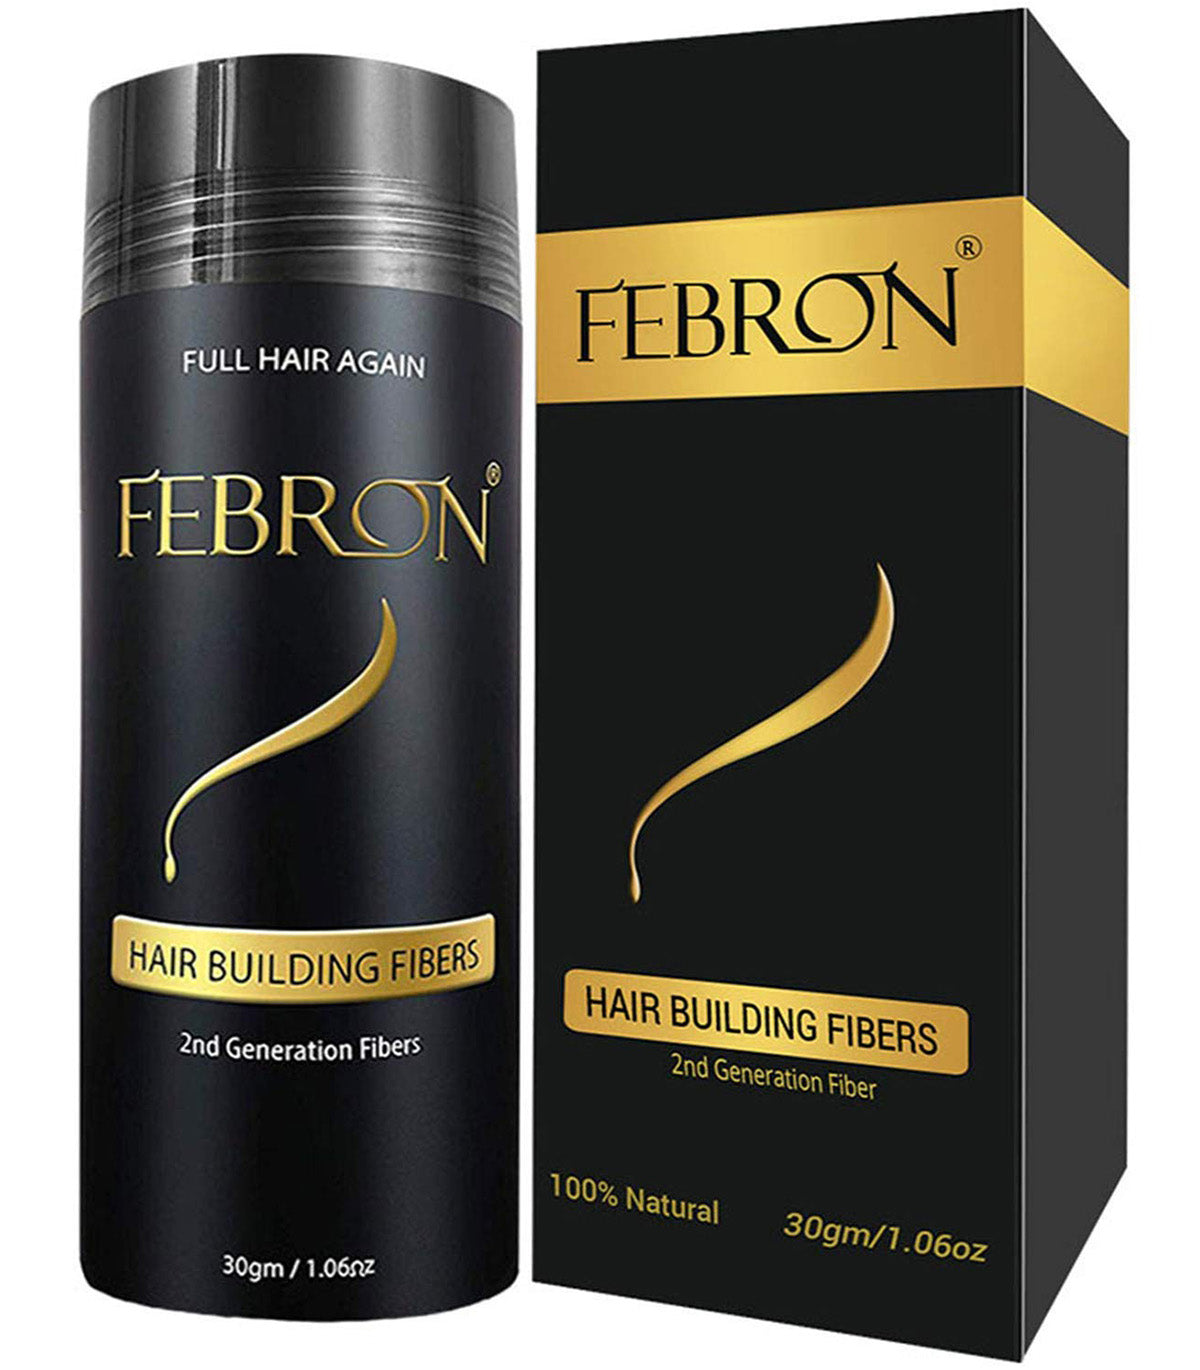 Thinning Hair Product - Instant Solution! By Febron